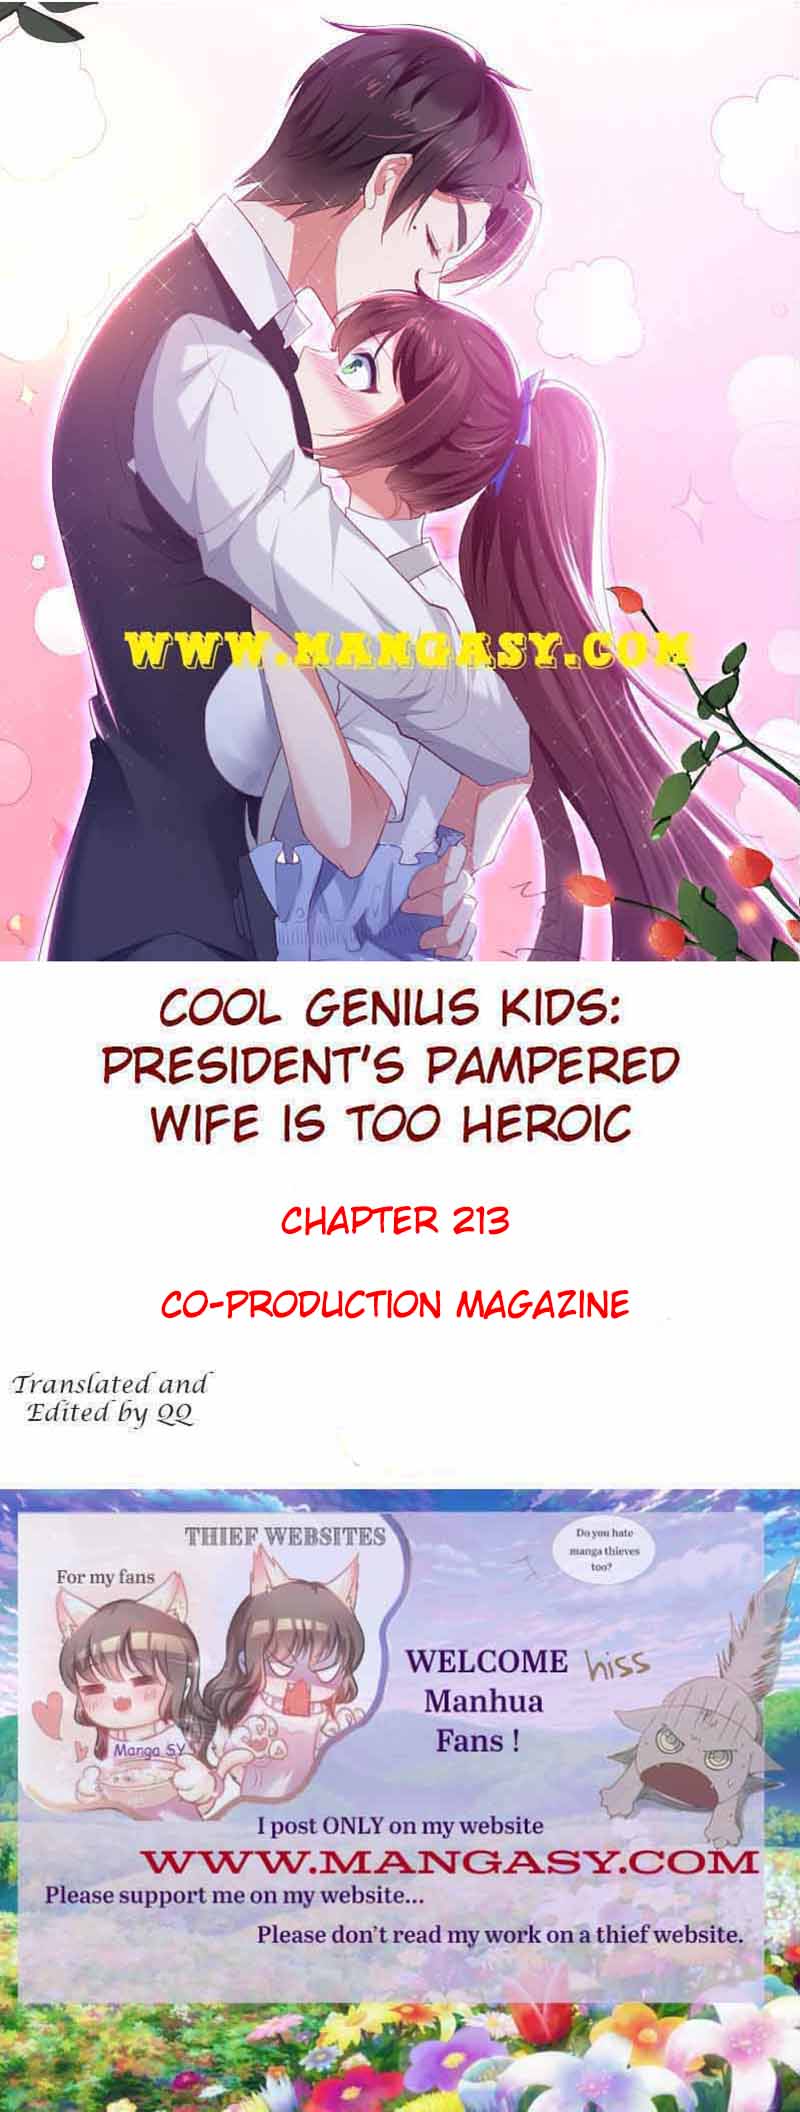 The Young Smart Kids-President’S Pampered Wife Is Too Heroic - Page 1